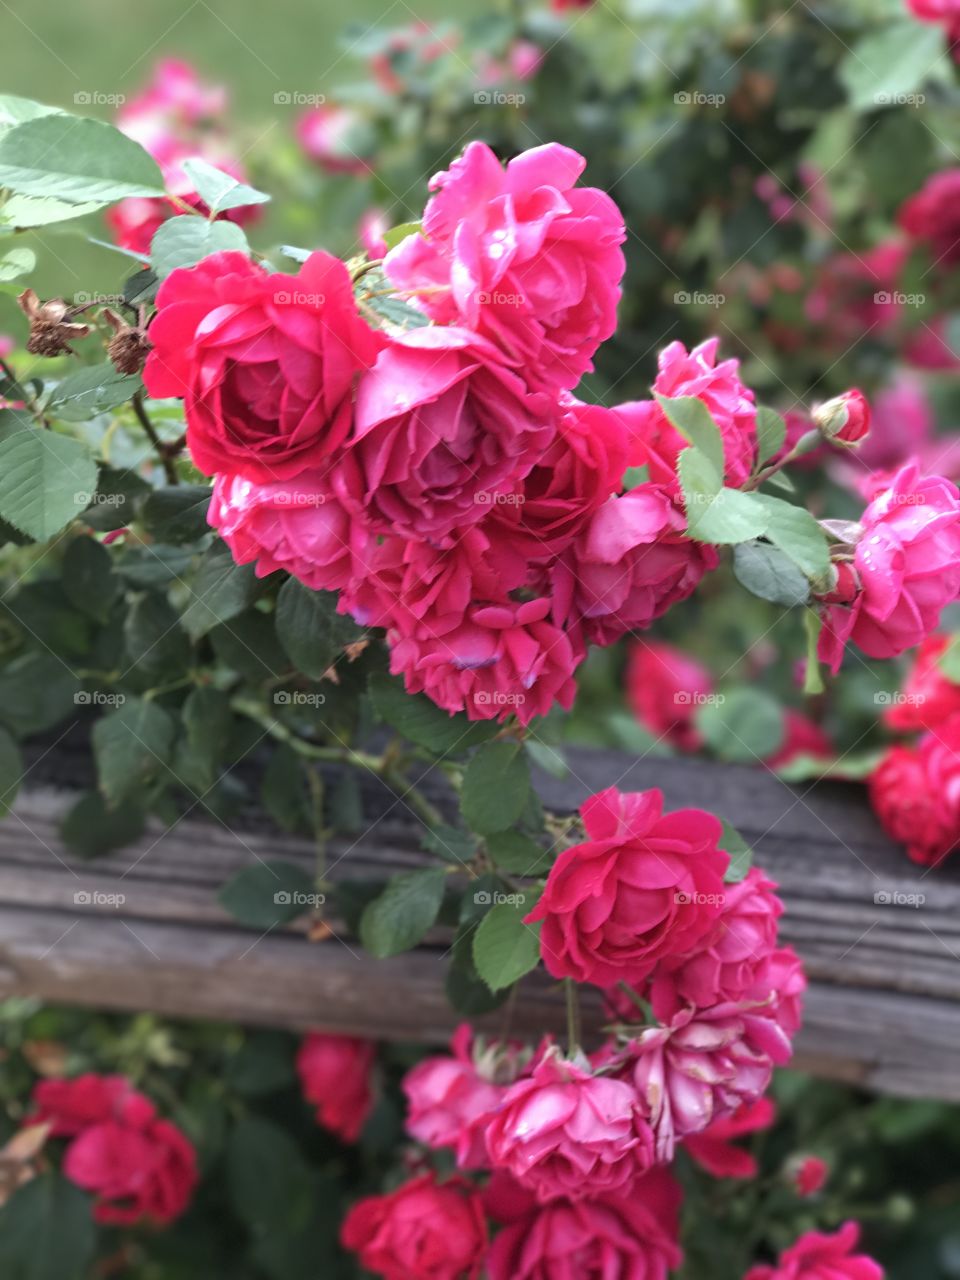 Some beautiful pink roses